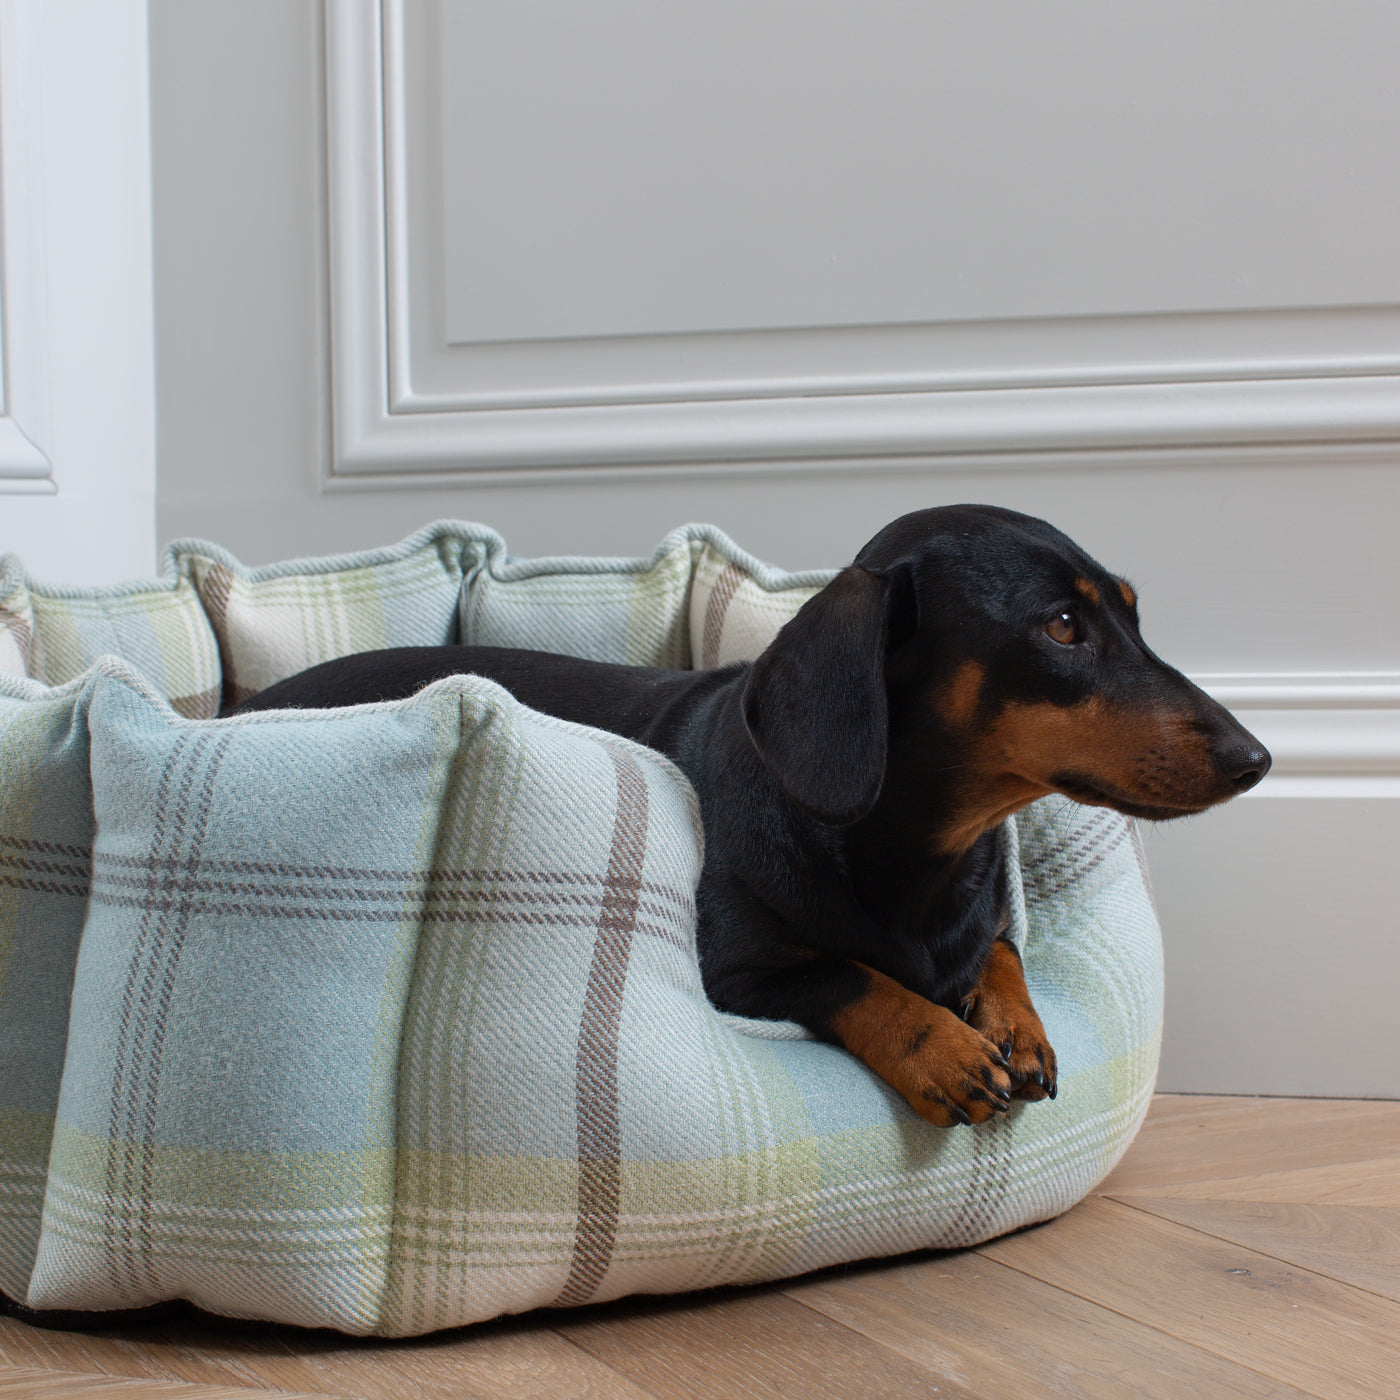 Discover Our Luxurious High Wall Bed For Dogs, Featuring inner pillow with plush teddy fleece on one side To Craft The Perfect Dogs Bed In Stunning Duck Egg Tweed! Available To Personalise Now at Lords & Labradors    